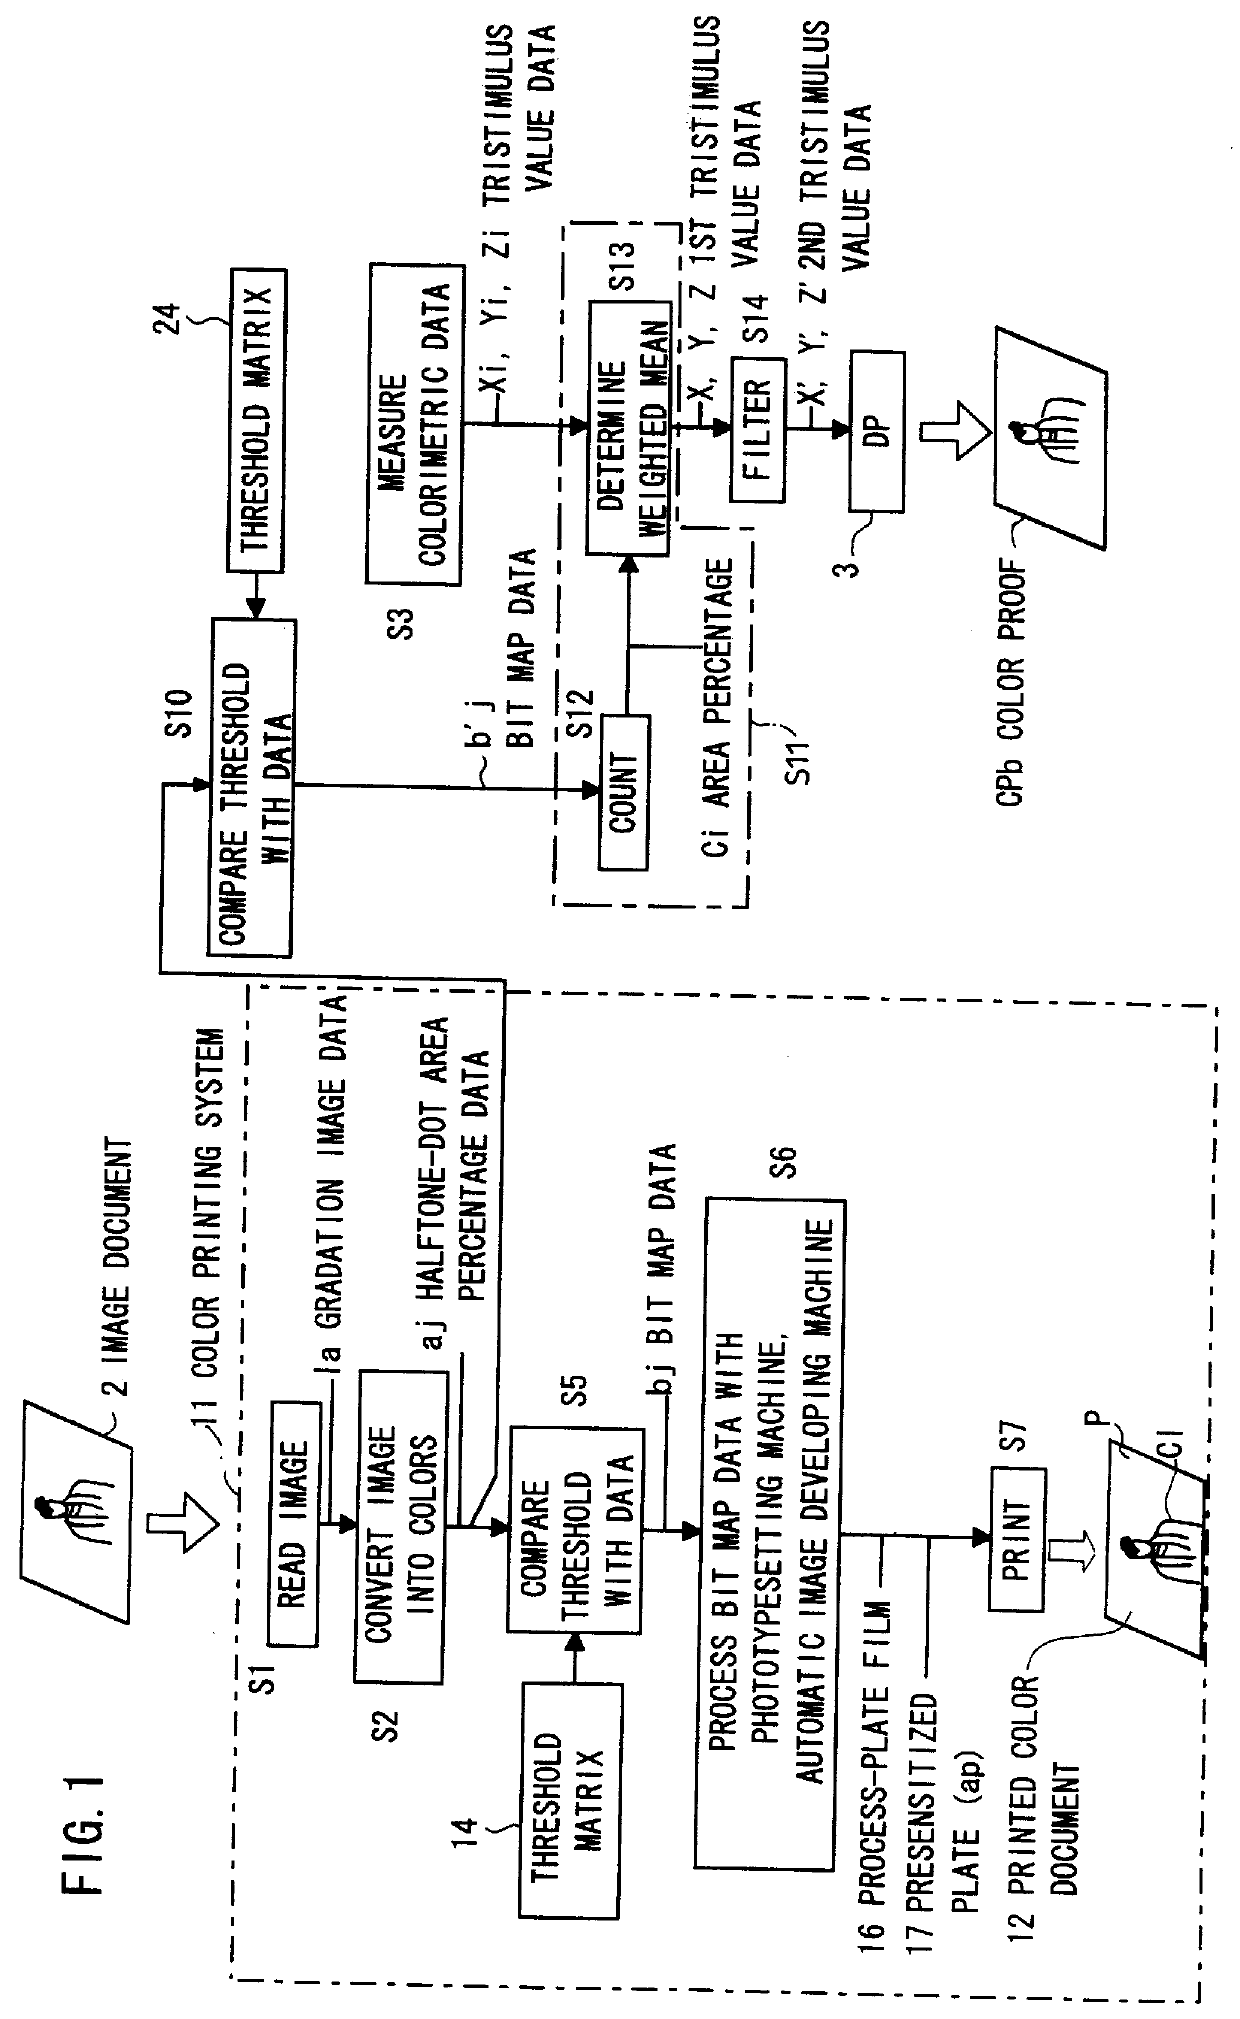 Method of generating proof data and method of generating proof